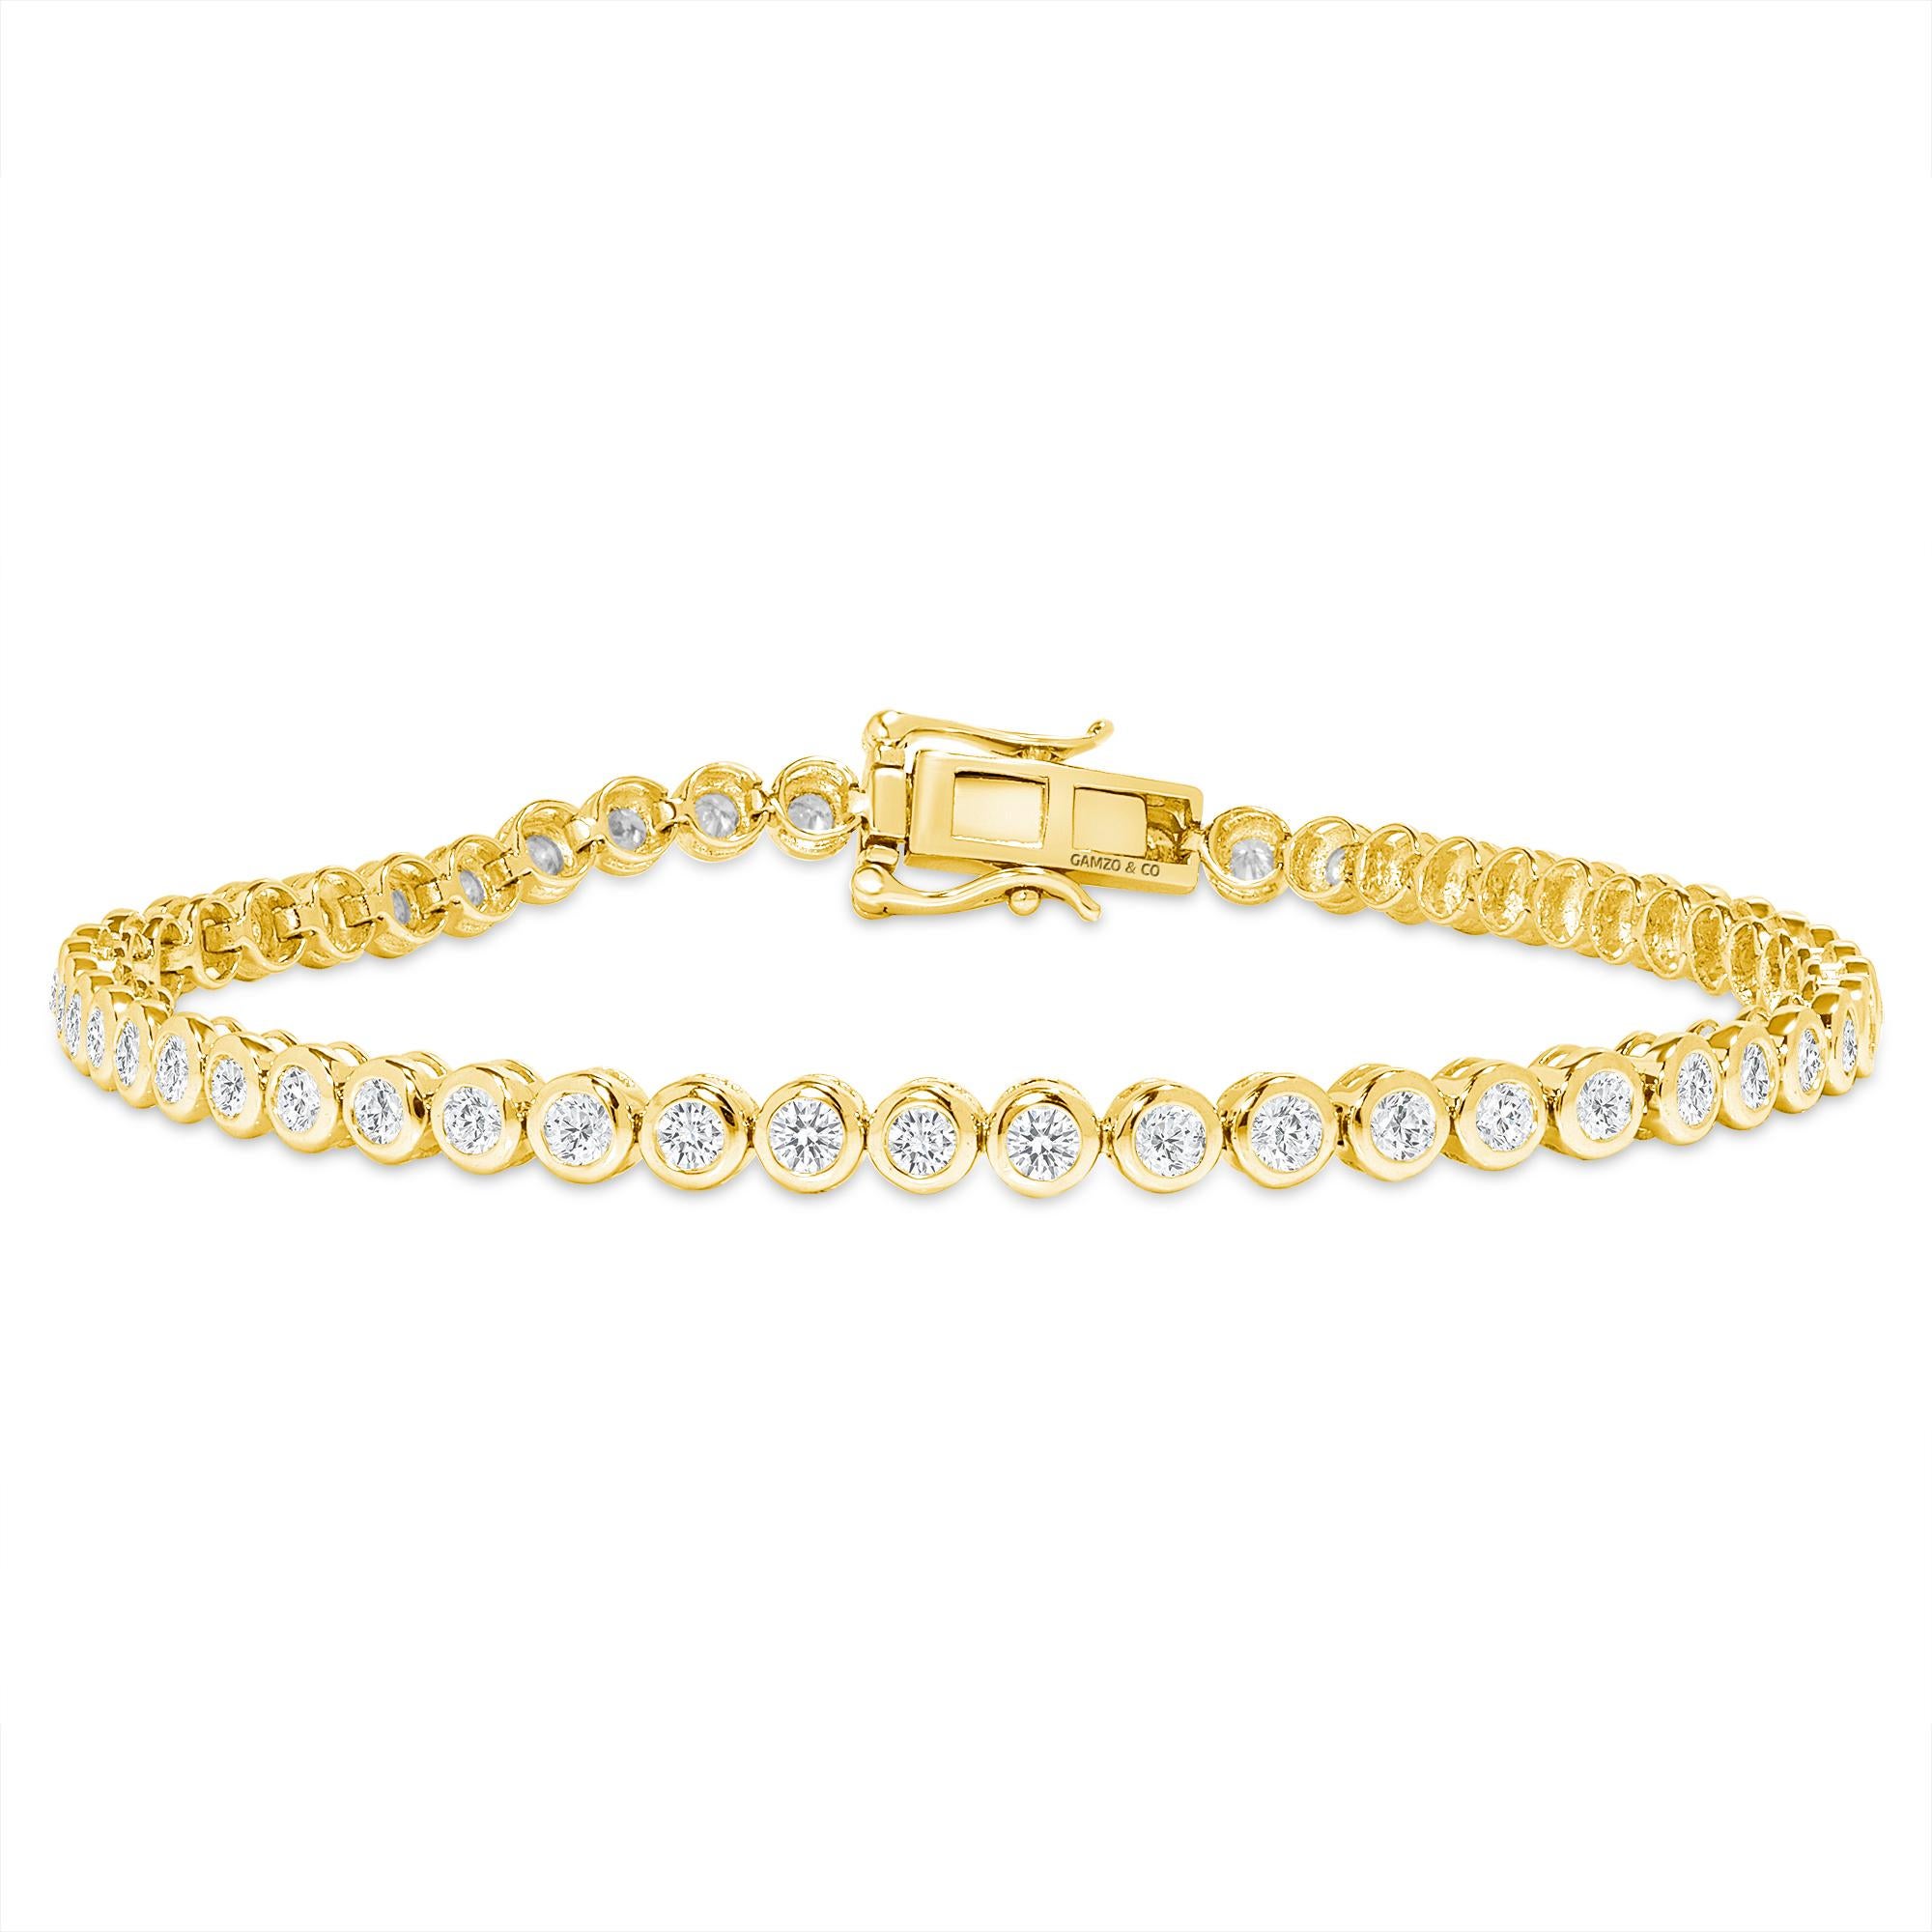 These beautiful round diamonds dance around your wrist as they absorb light and attention.
Metal: 14k Gold
Diamond Cut: Round
Diamond Total Carats: 5ct
Diamond Clarity: VS
Diamond Color: F
Color: Yellow Gold
Bracelet Length: 5 Inches 
Included with